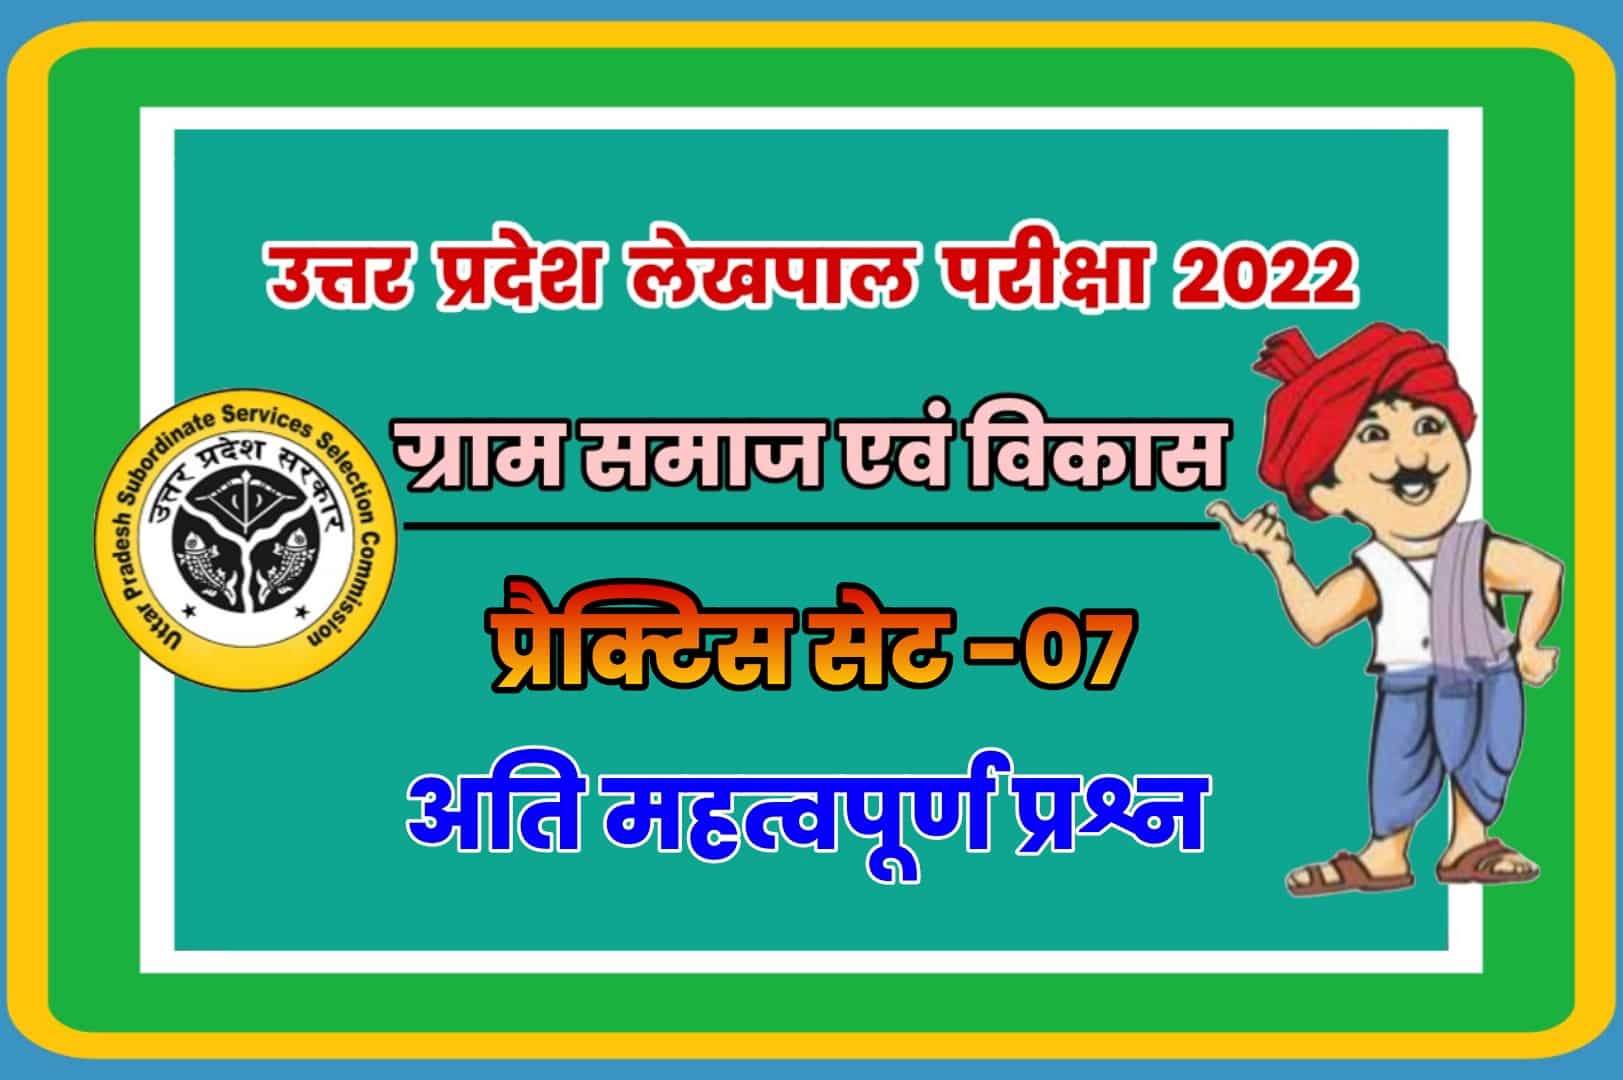 UP Lekhpal Villege Society And Development Practice Set 07